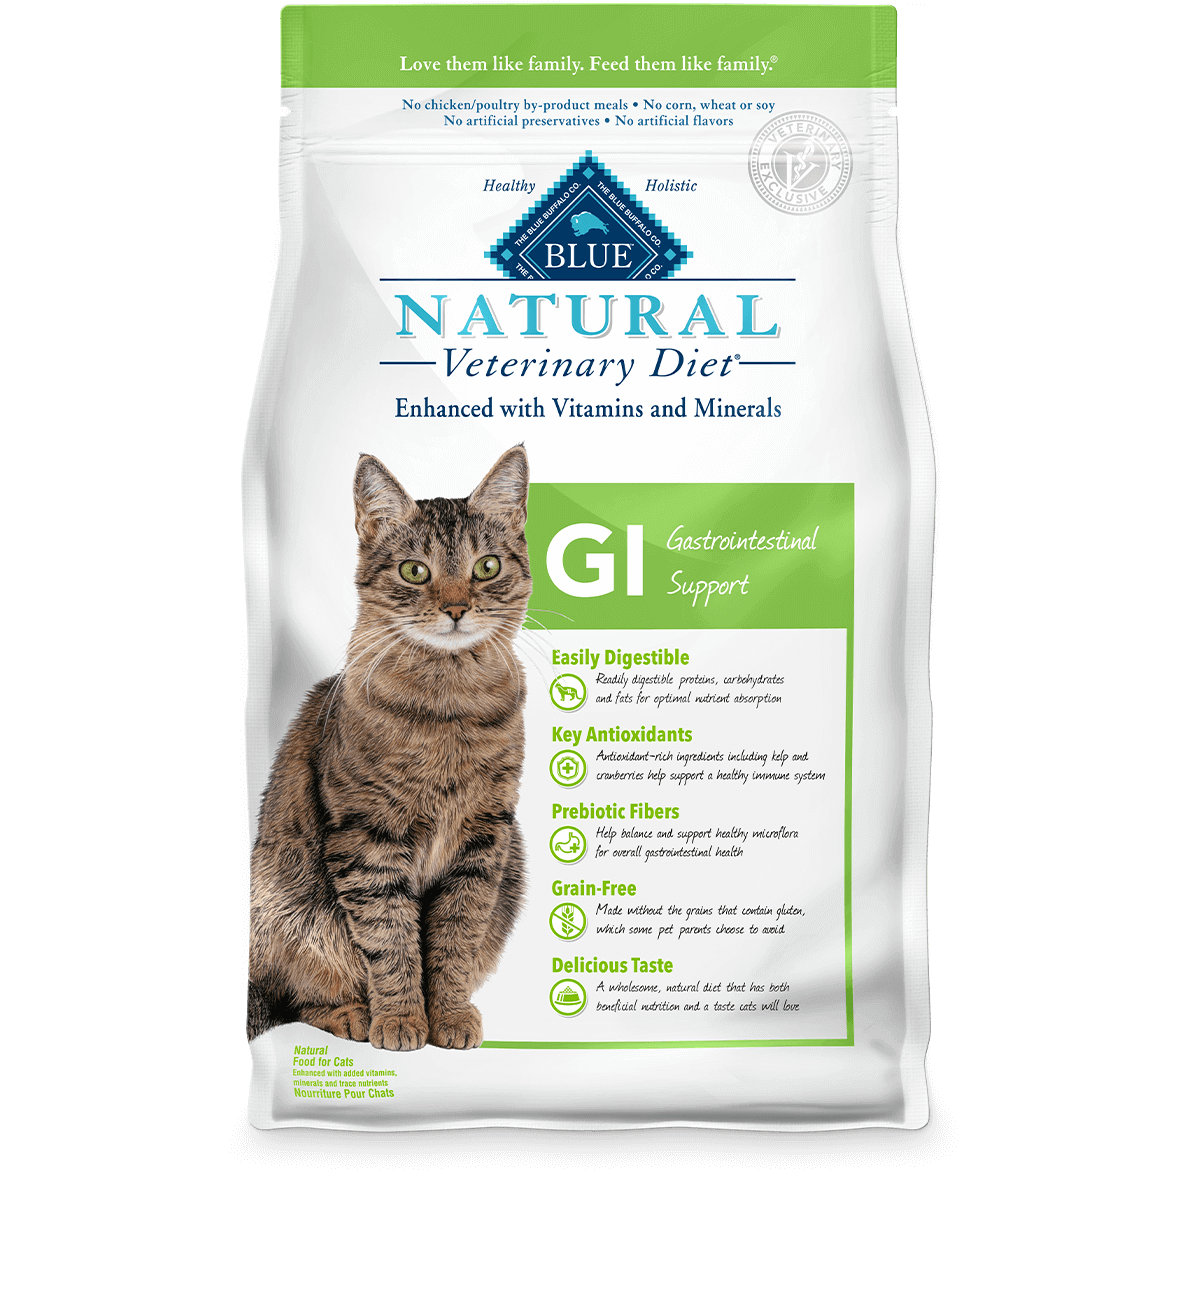 blue natural veterinary diet gi gastrointestinal support cat dry food